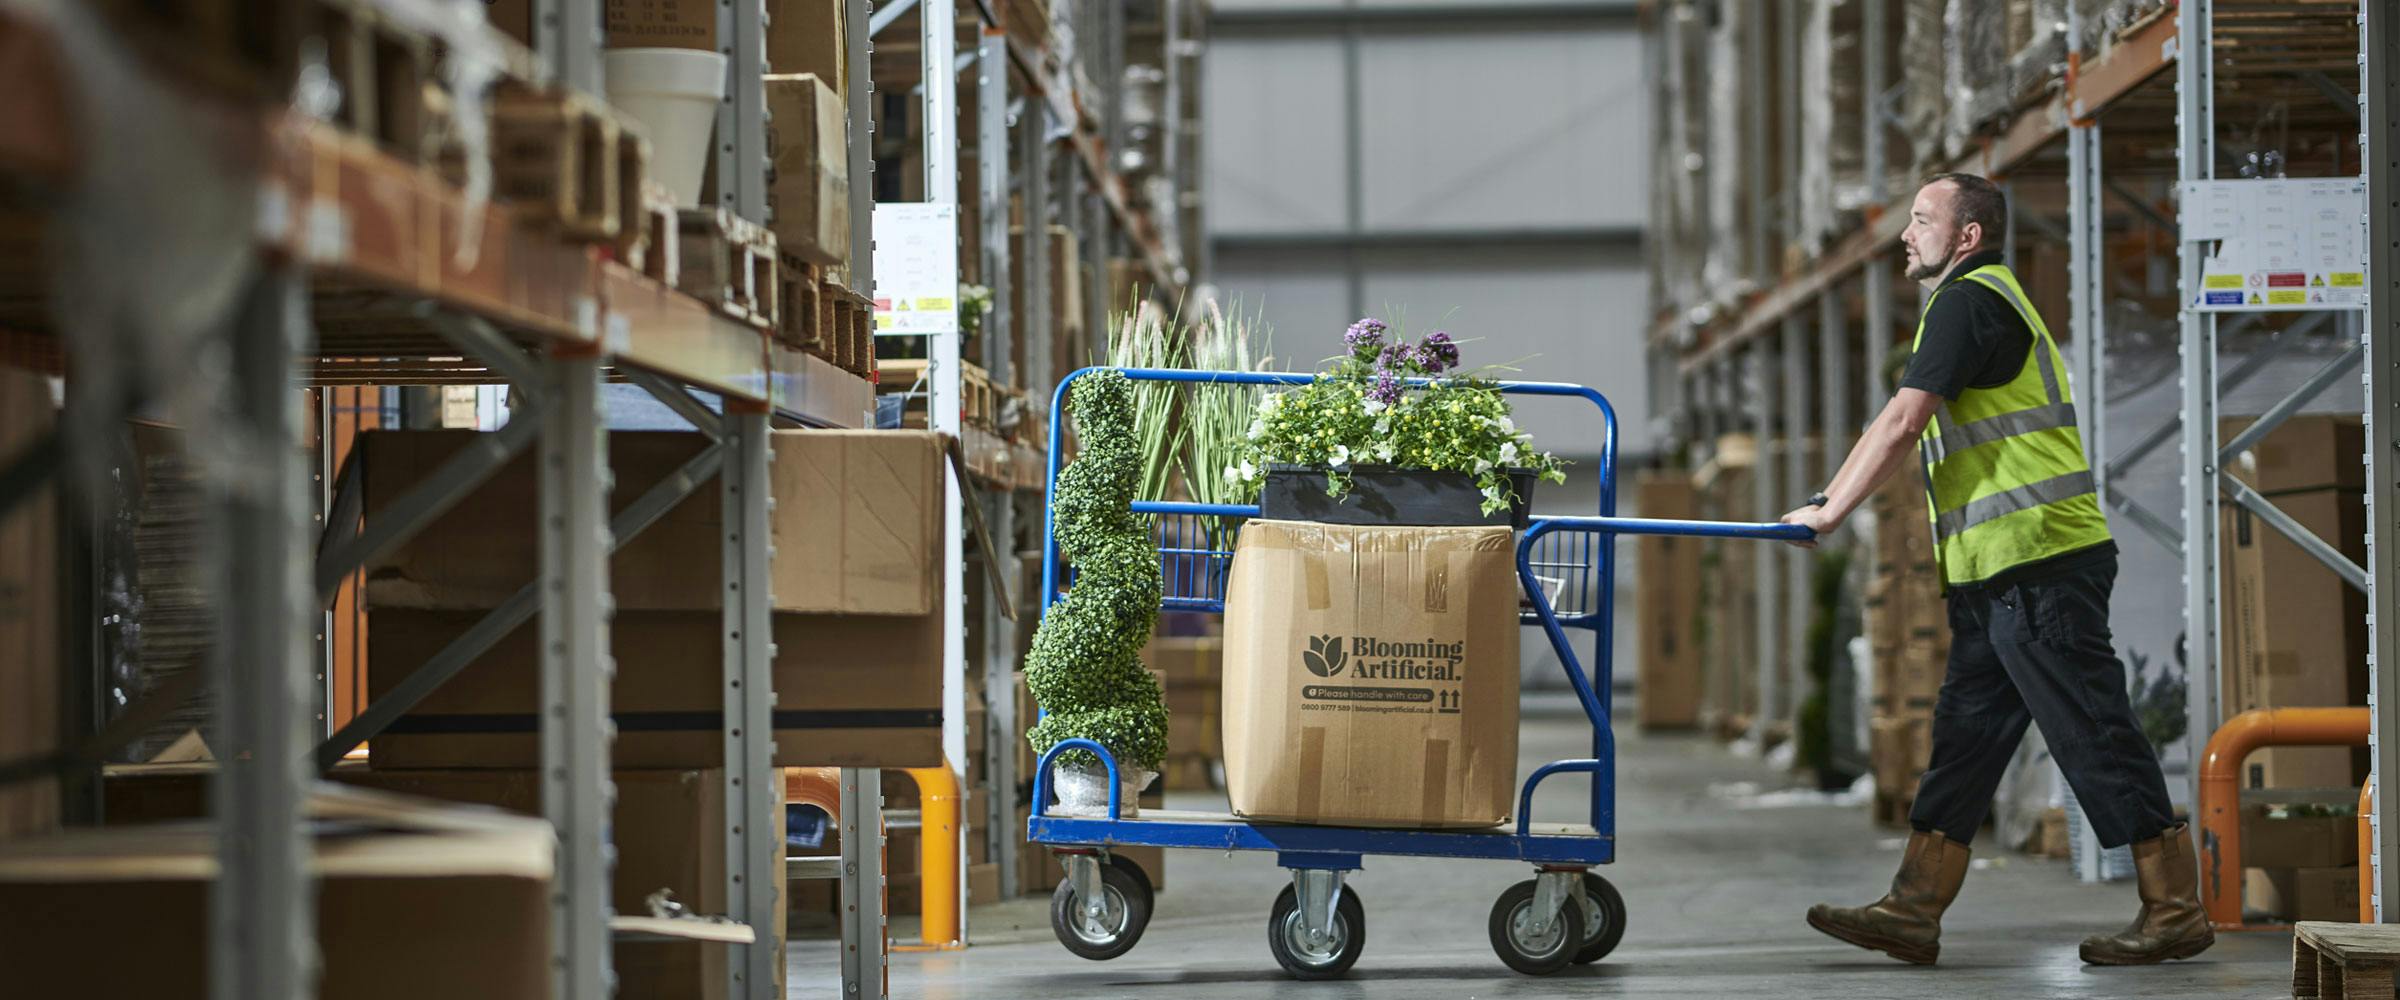 Warehouse operator picking artificial plants Blooming Artificial